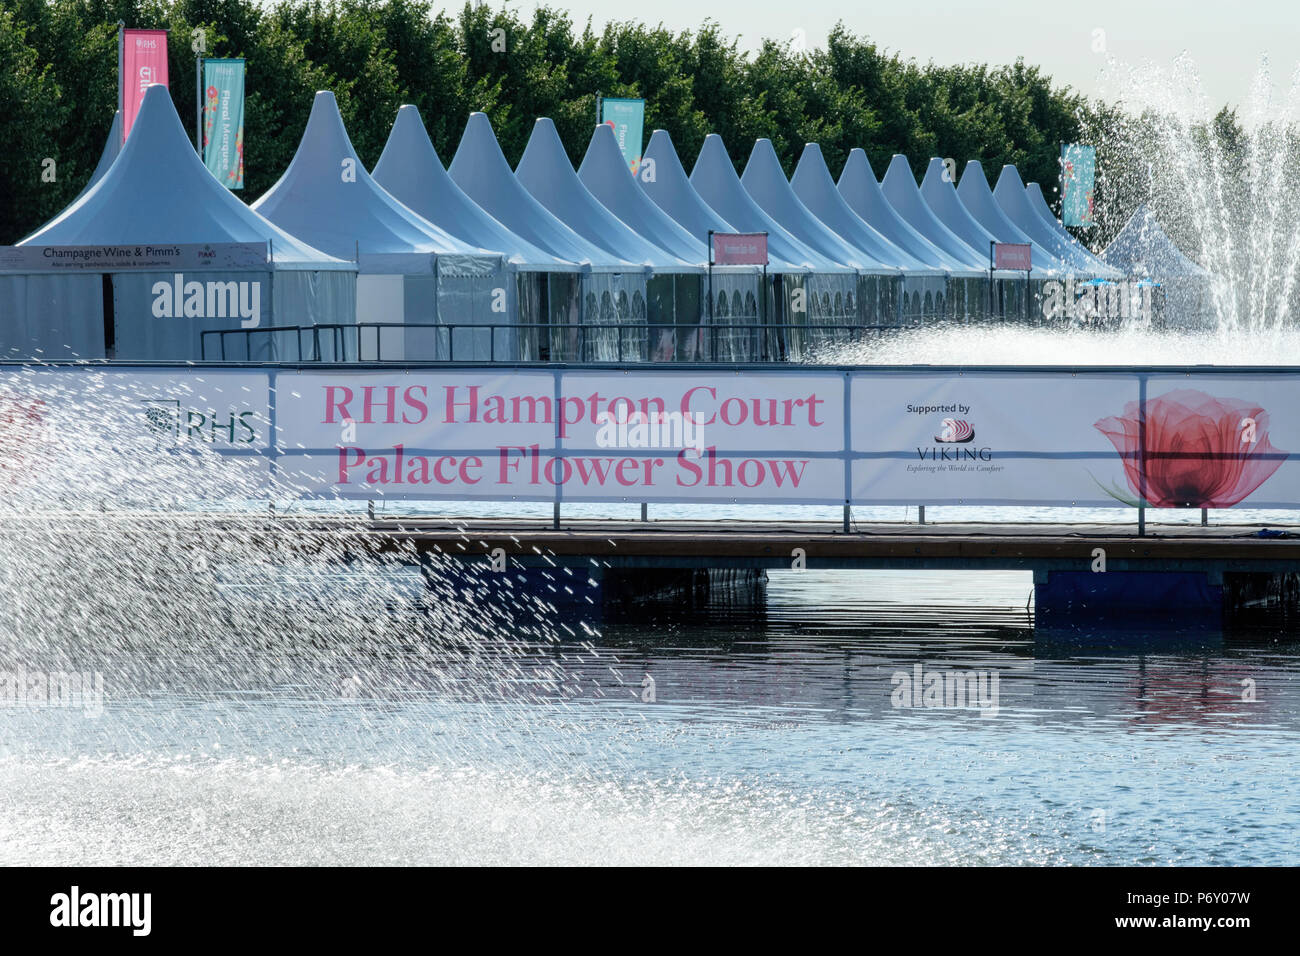 RHS Hampton Court Palace Flower Show, 2018. Banner board, bridge, fountains and hospitality tents Stock Photo